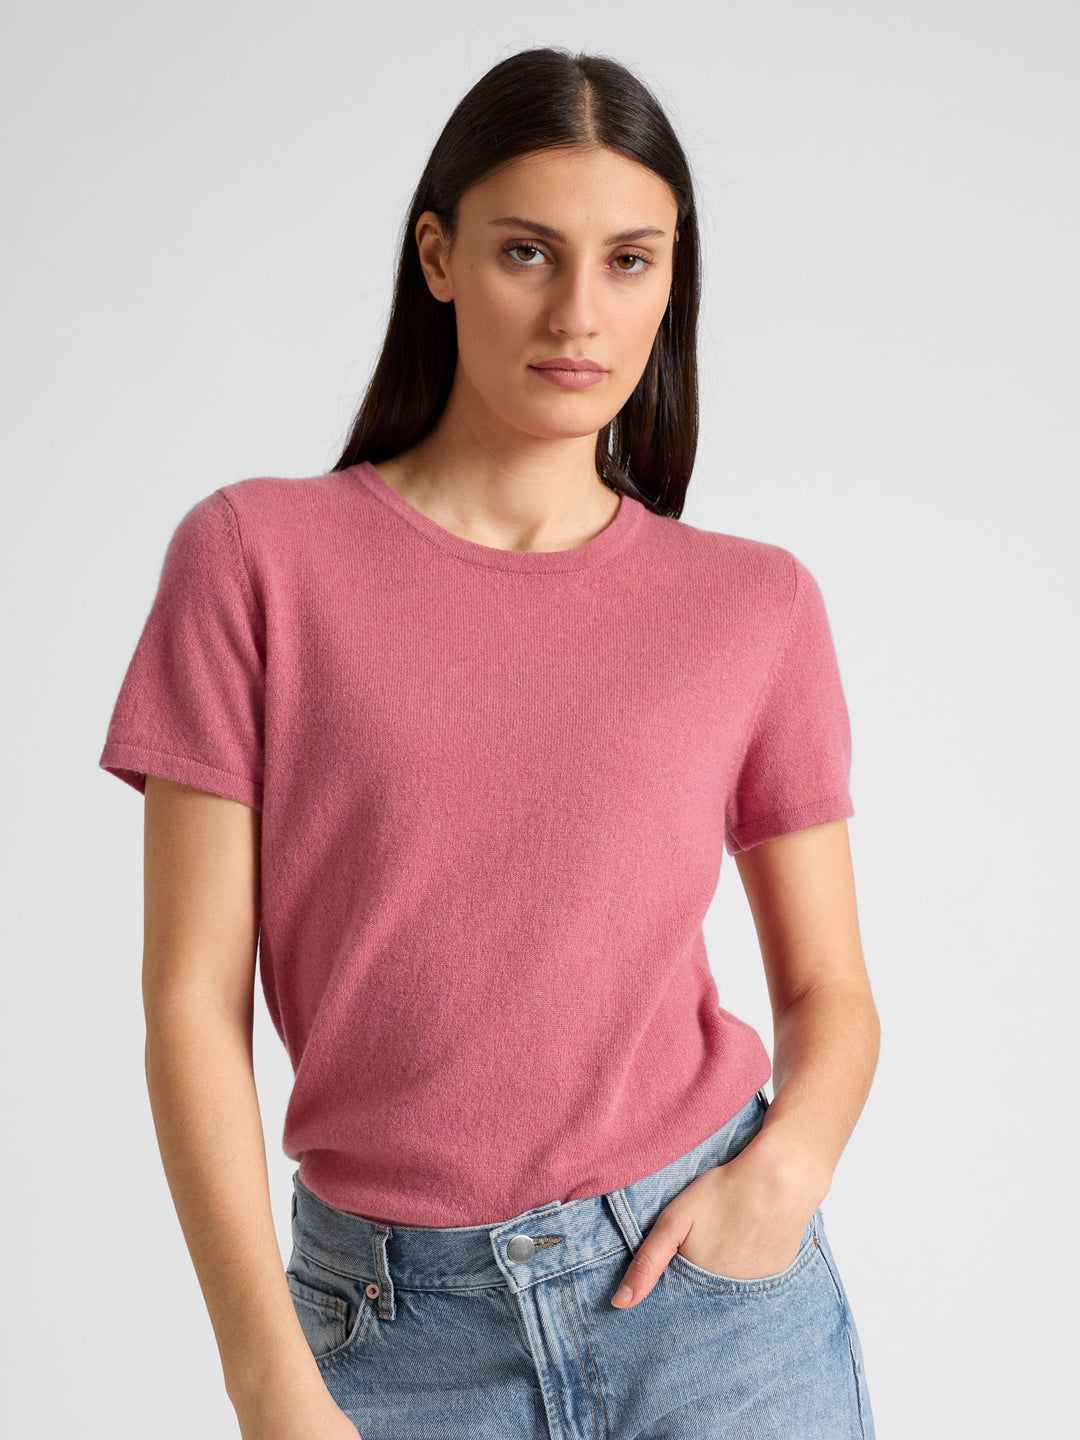 cashmere t-shirt tee shirt sustainable fashion luxury quality norwegian design. Color Pink Berry